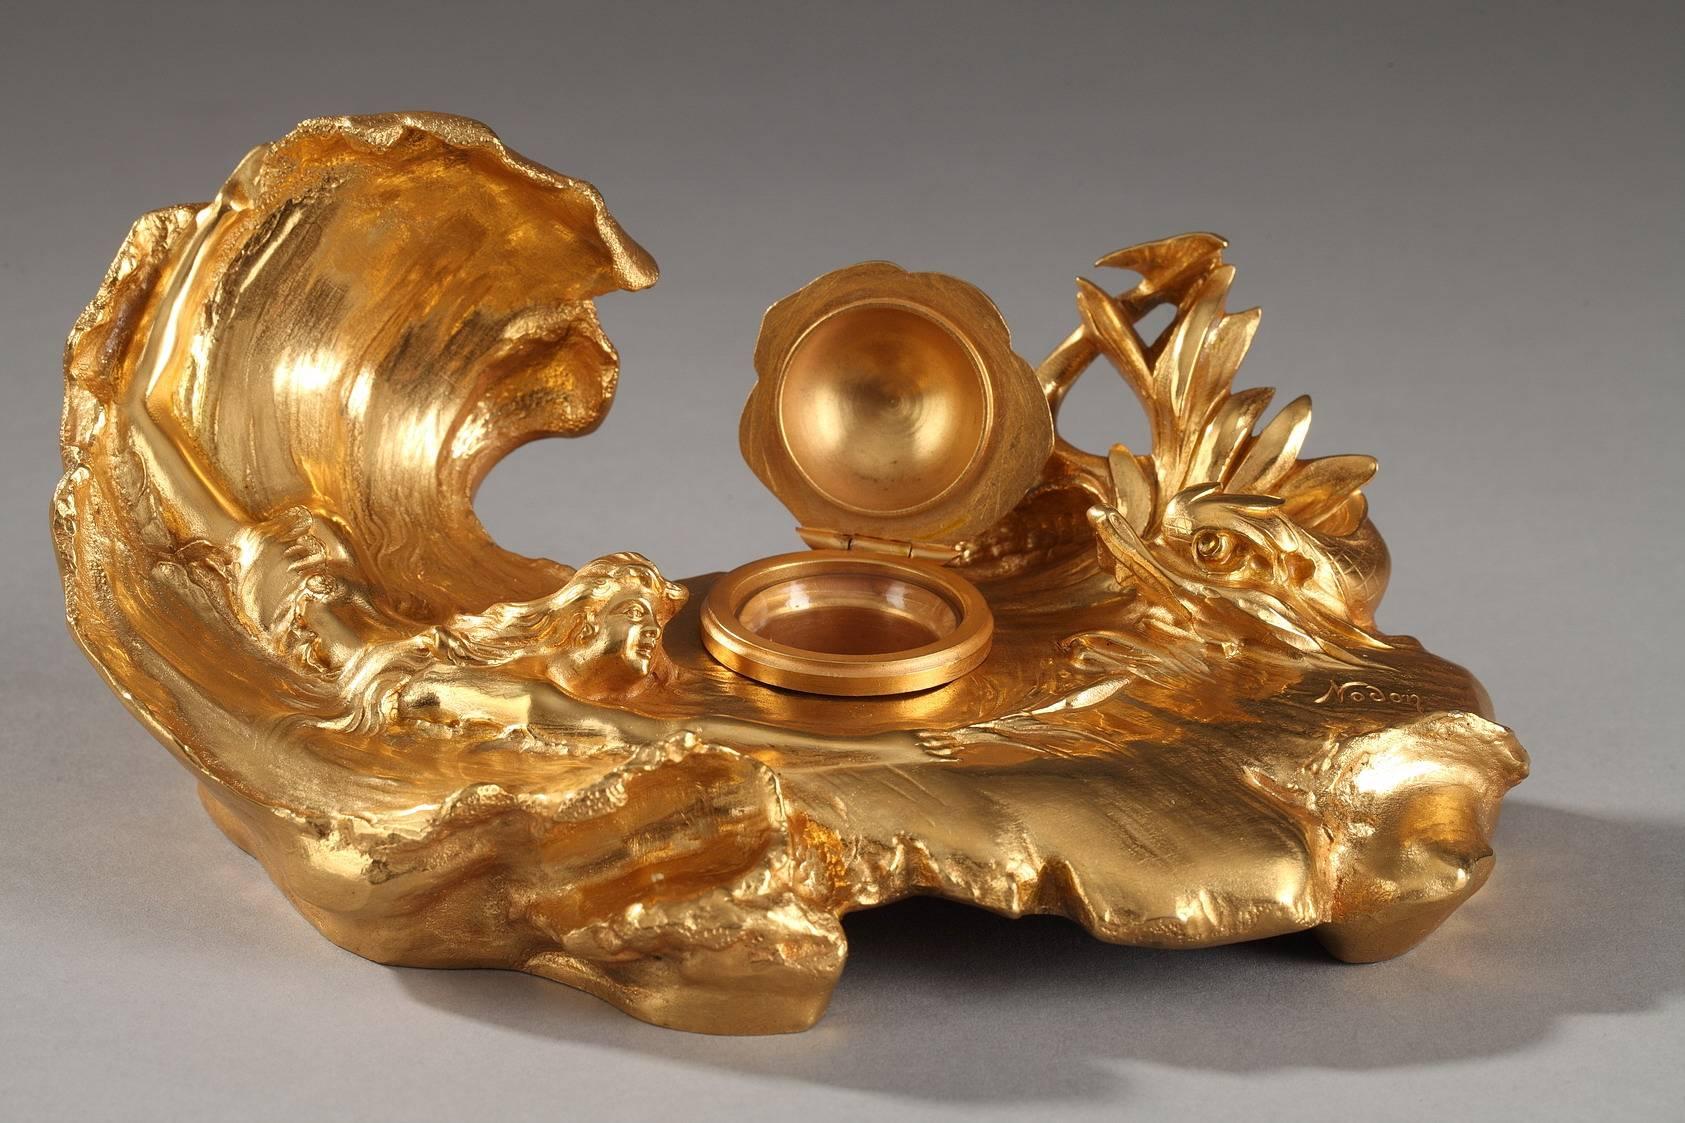 Small, gilt bronze inkwell, sculpted to portray a young woman swimming in the waves of the sea toward a dolphin. The predominance of curves and flowing lines, the inspiration from the natural world, as well as the feminine subject make this piece a